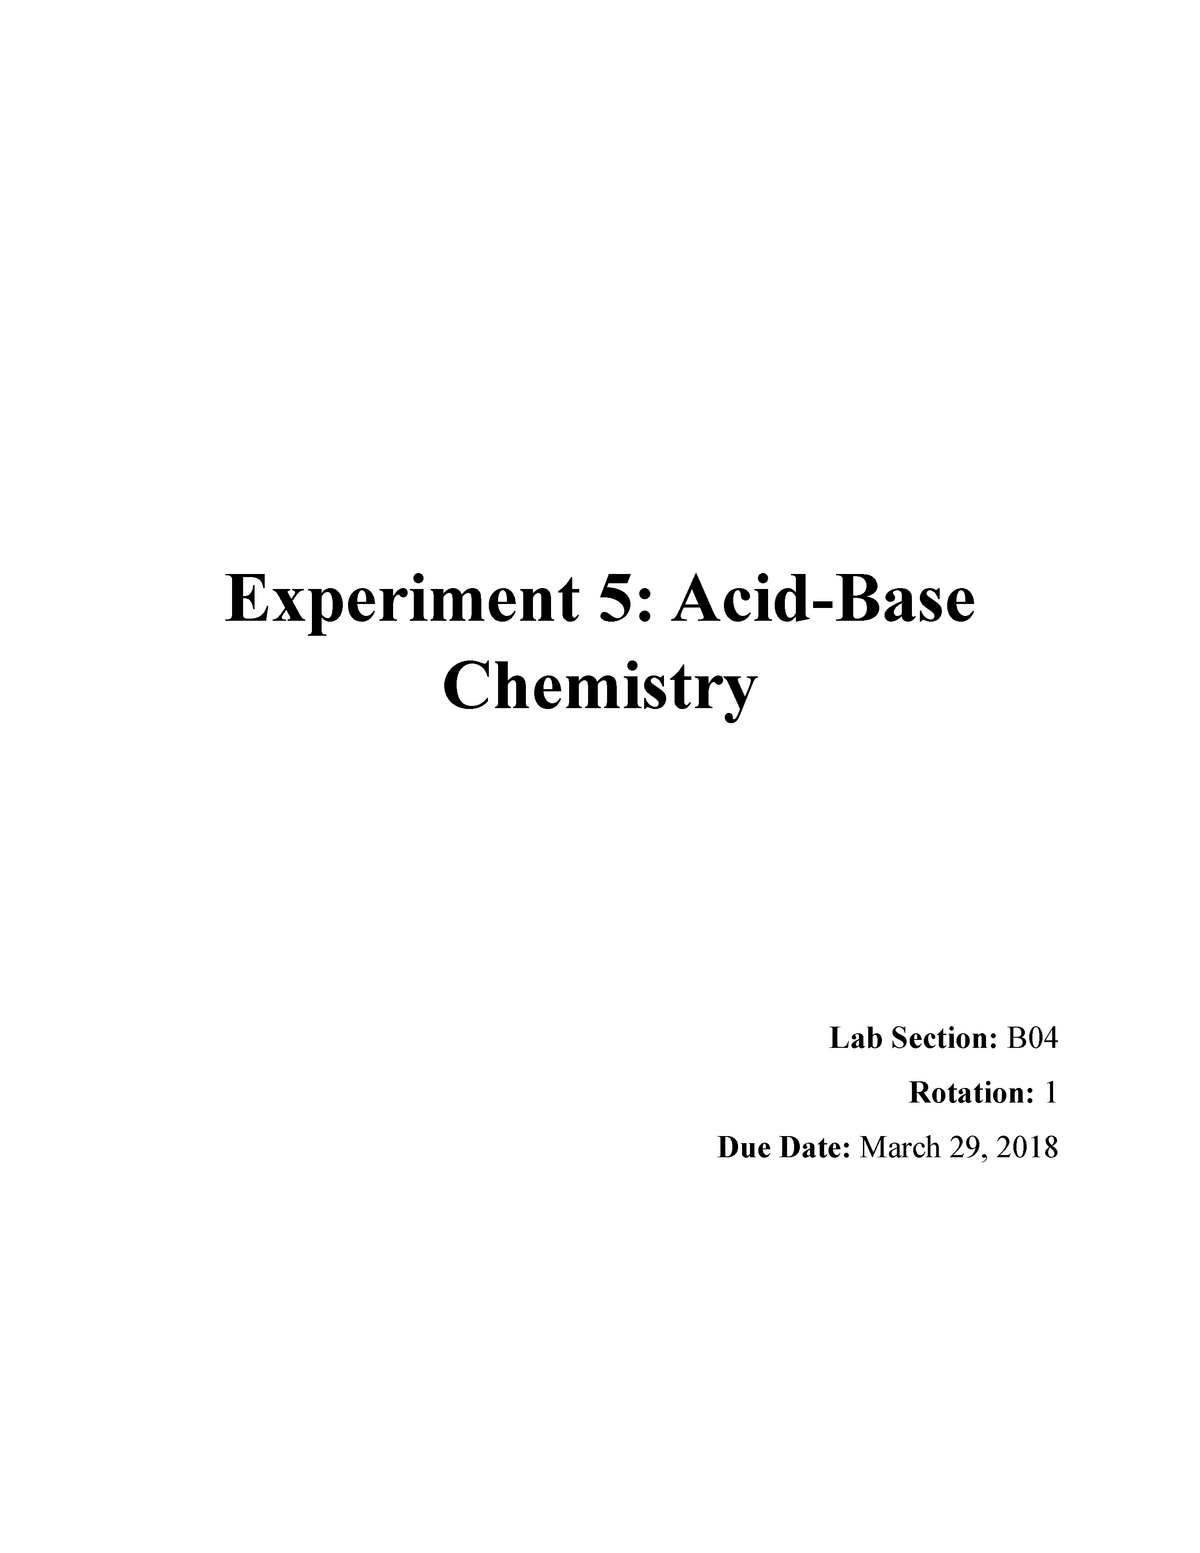 lab acids and bases assignment reflect on the lab